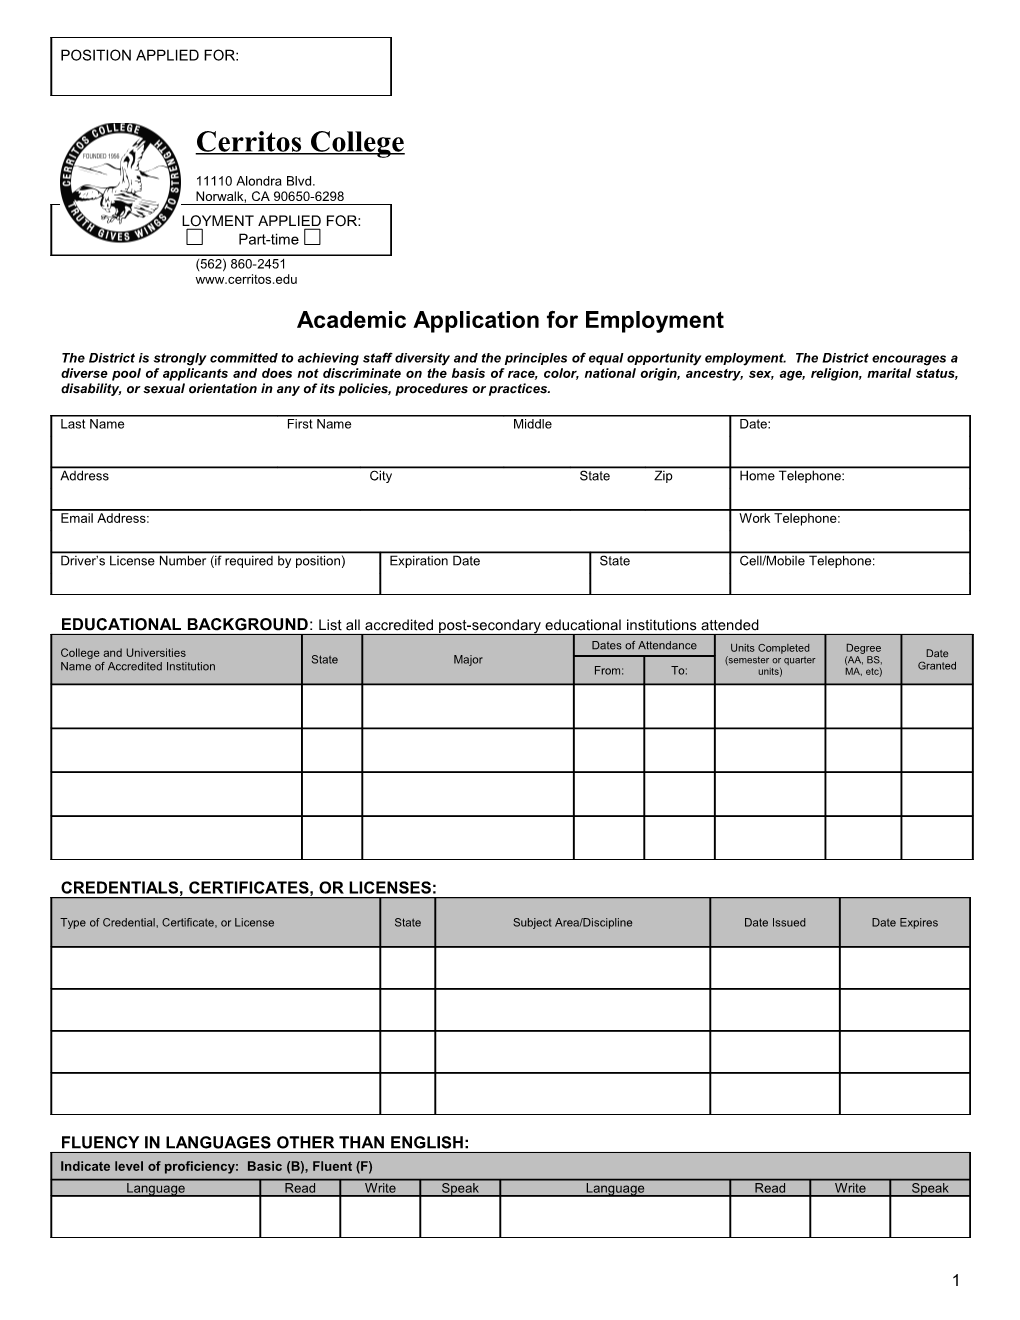 Academic Application for Employment